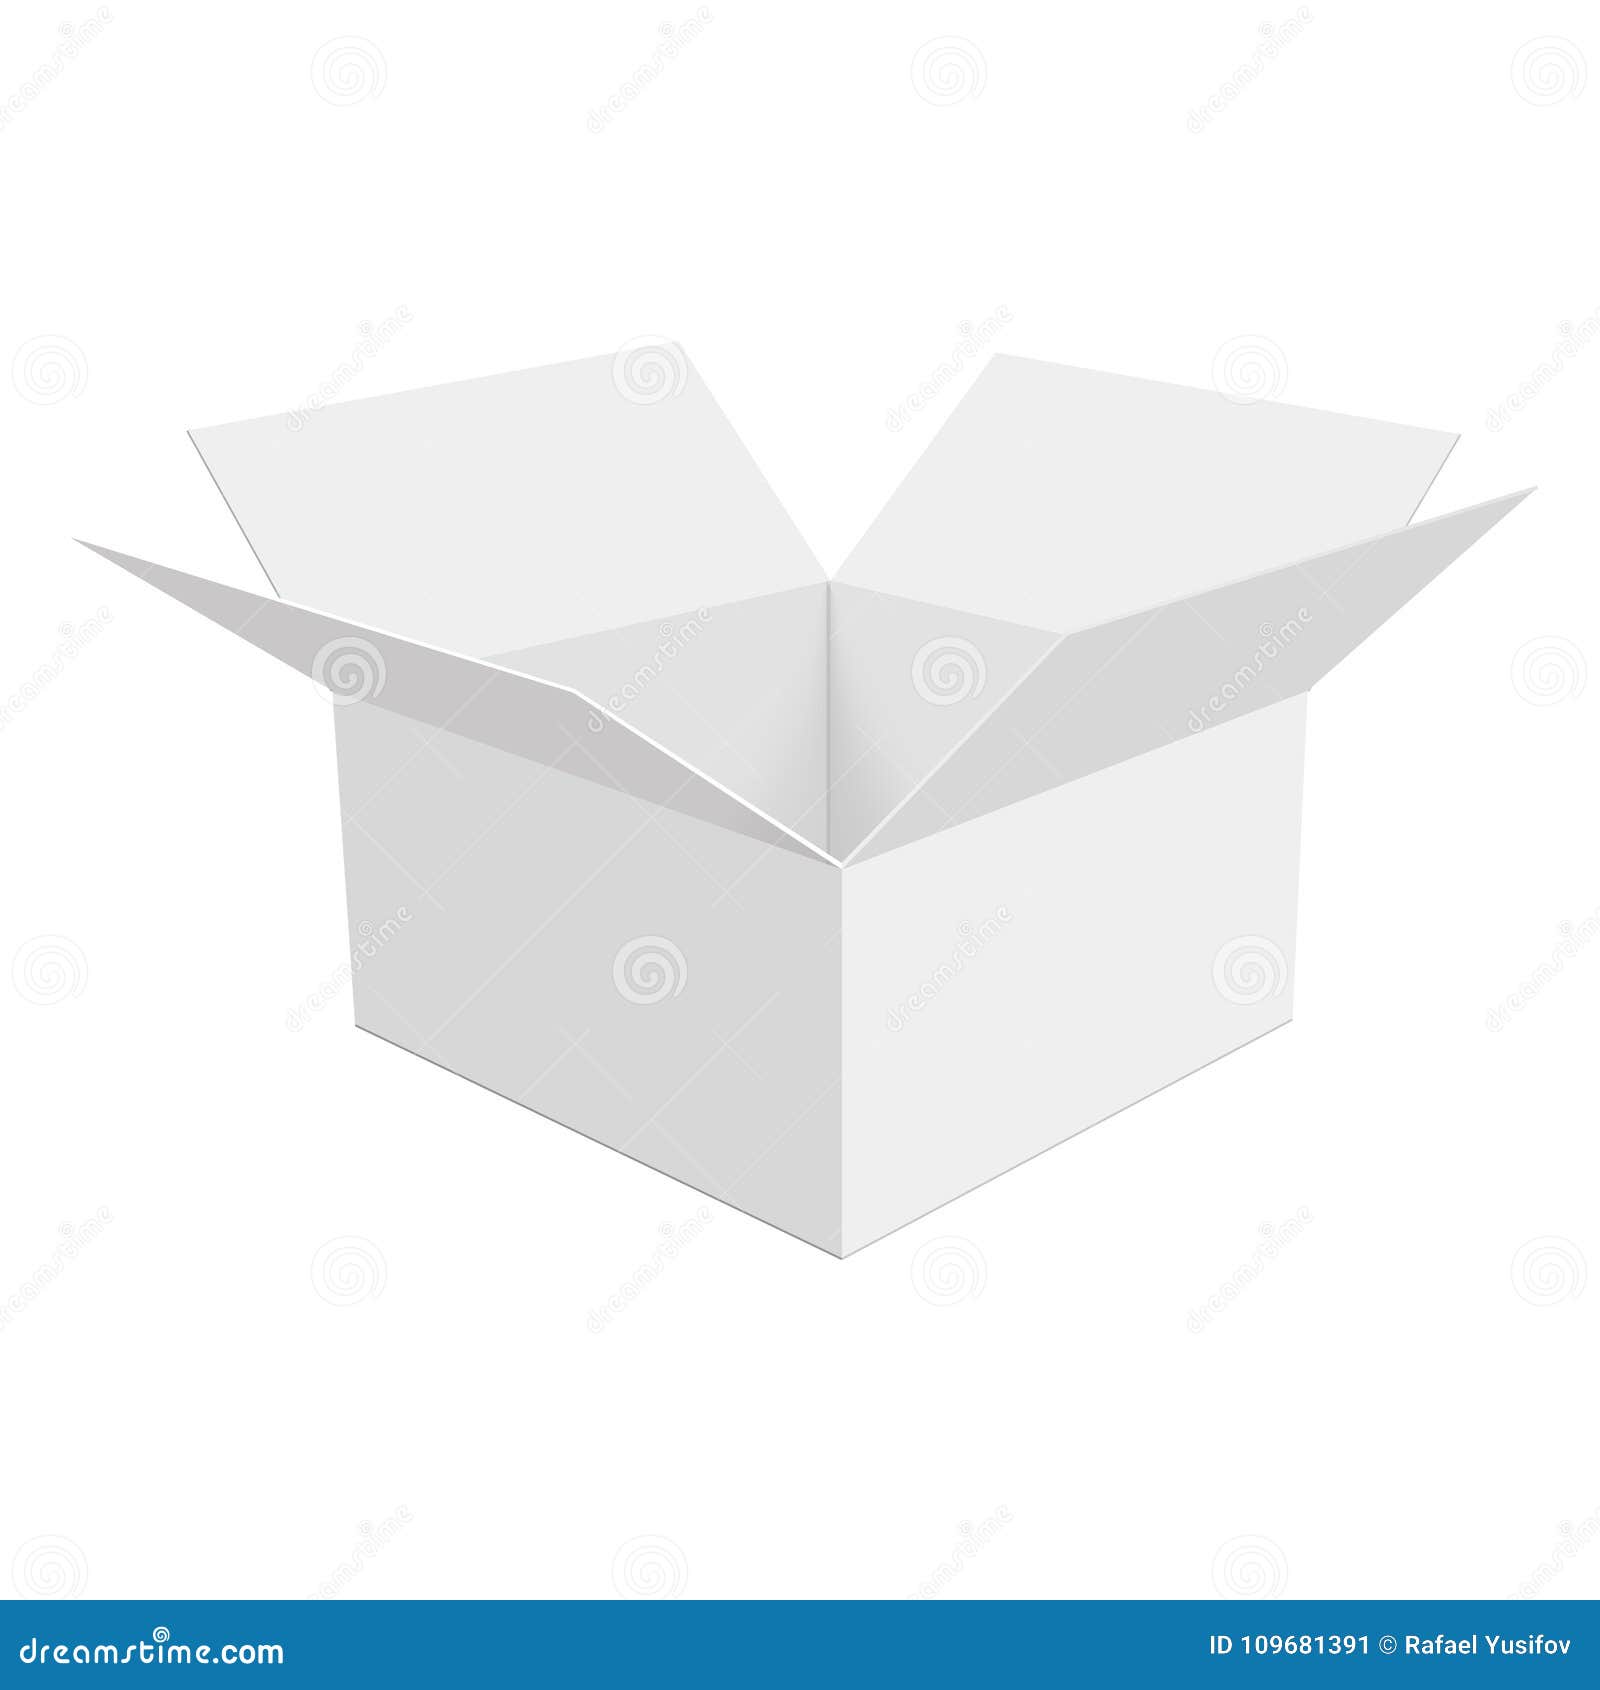 Download Blank Of White Opened Cardboard Box . Perspective View ...